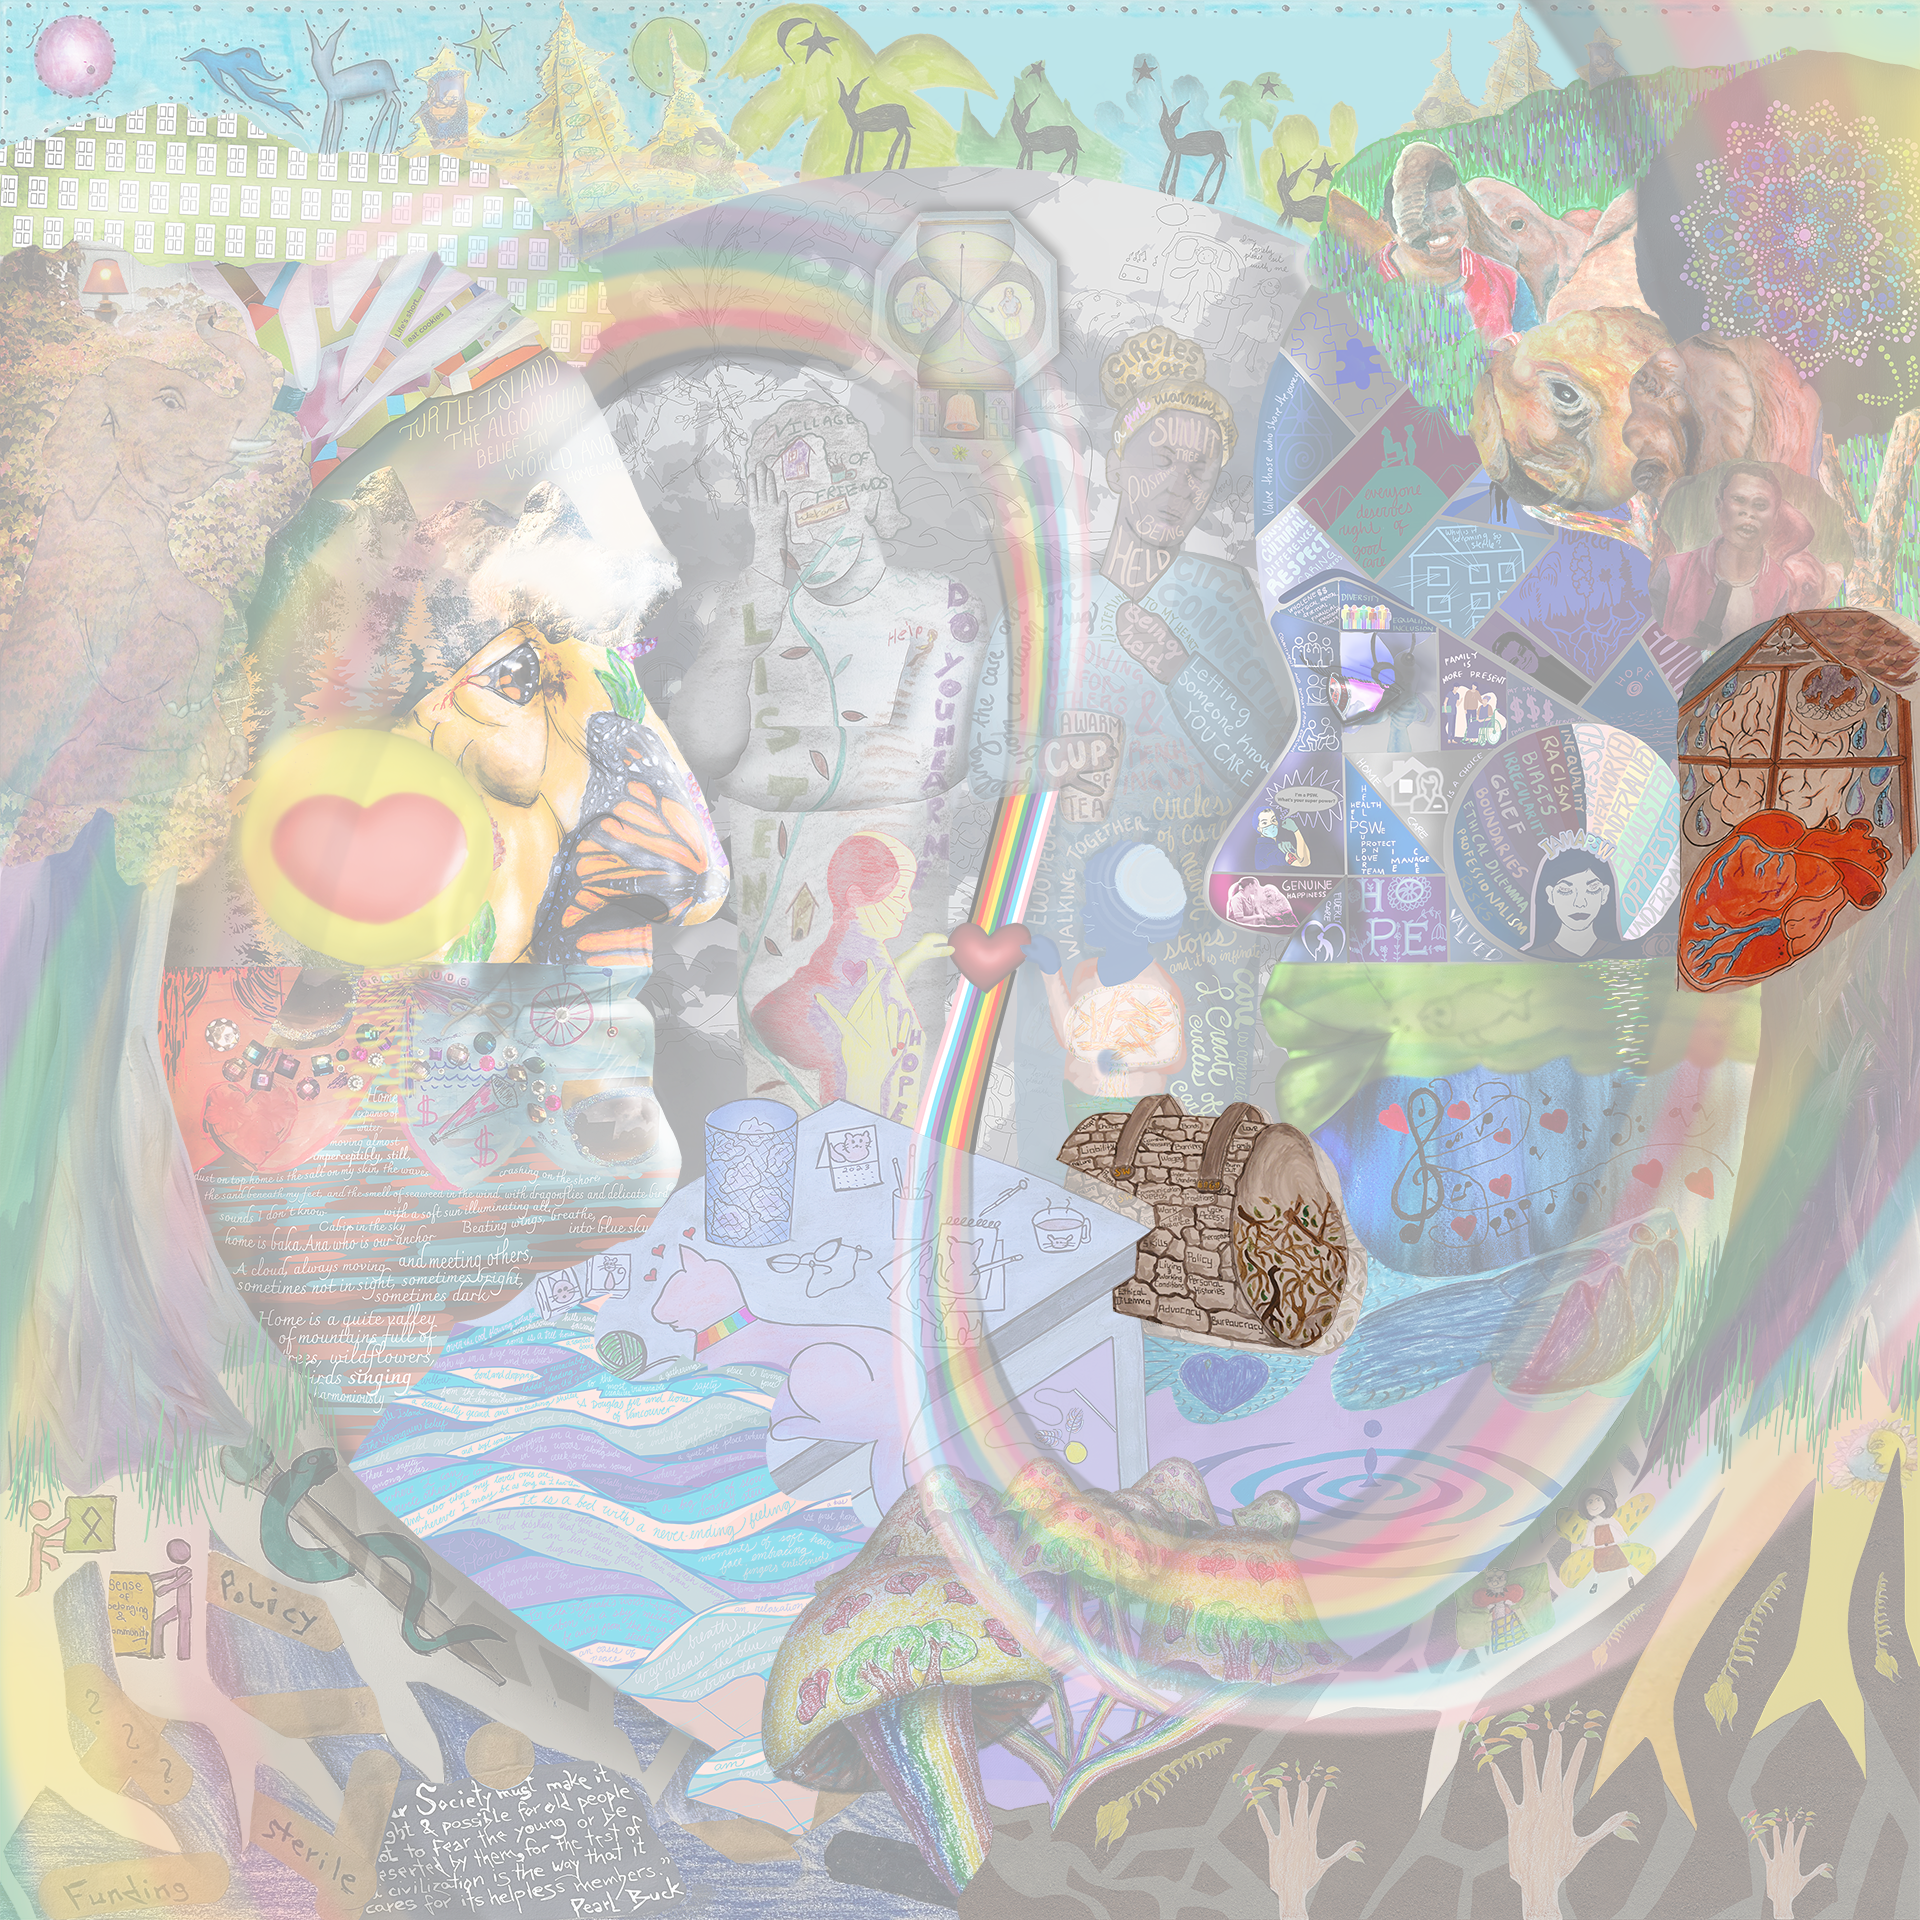 This layer depicts K.'s artwork. This first image shows an anatomically correct heart and brain, as well as two hands holding the Earth, all inside a roofed building. The second image is of a bag with a stone design, each with a written word on them that relates to care work. The bag handles say SW 1969 and the side of the bag has tree branches and green leaves.